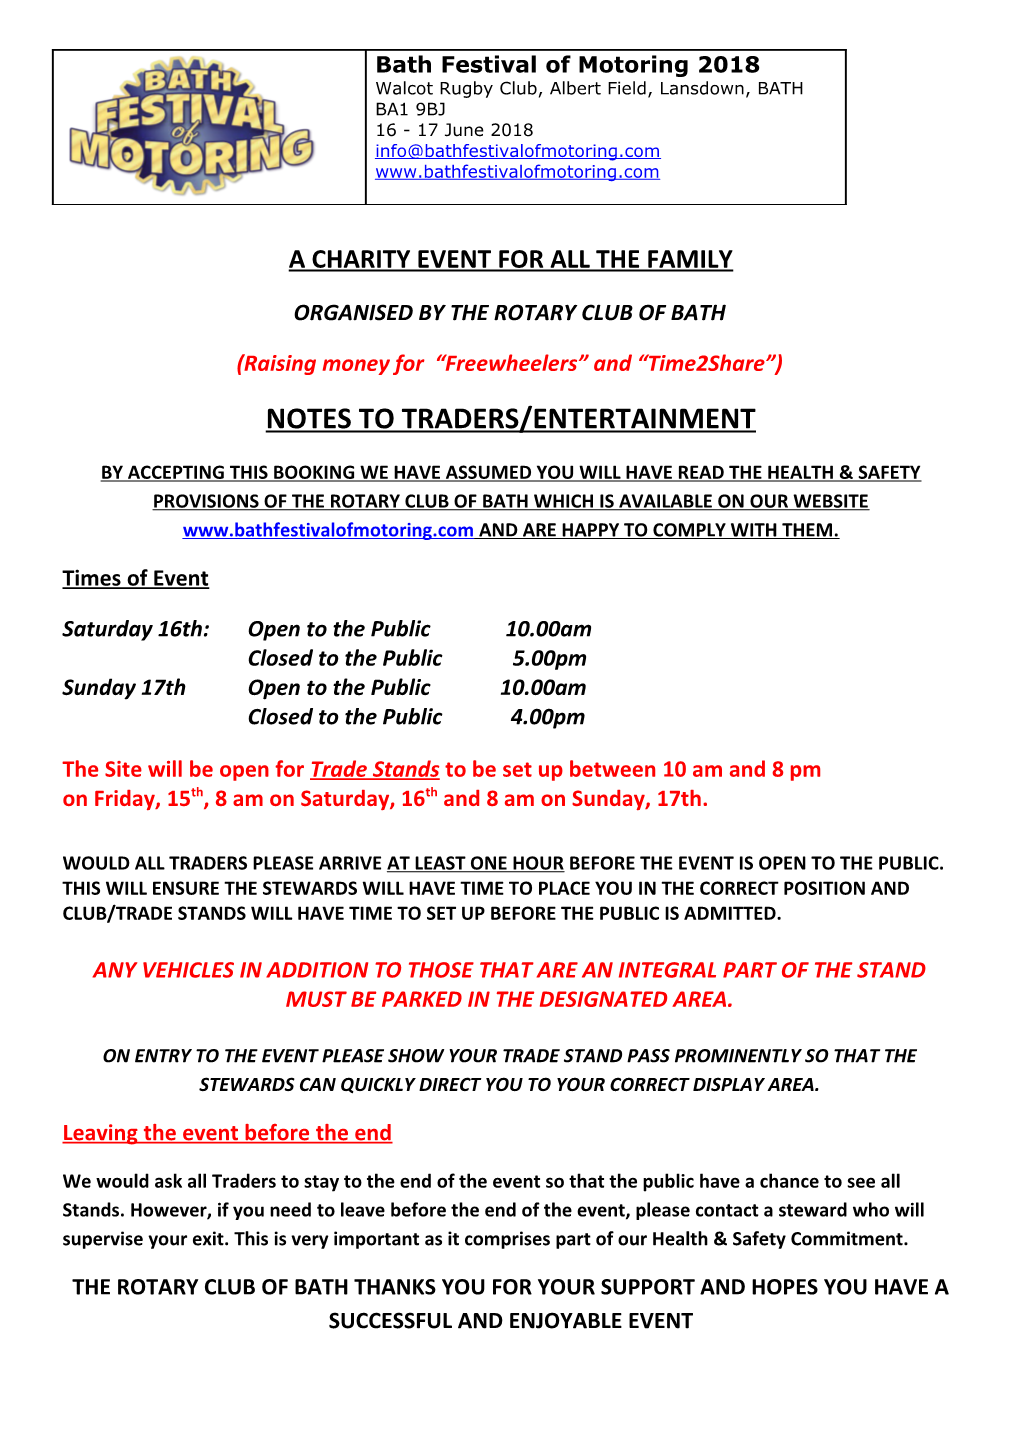 A Charity Event for All the Family